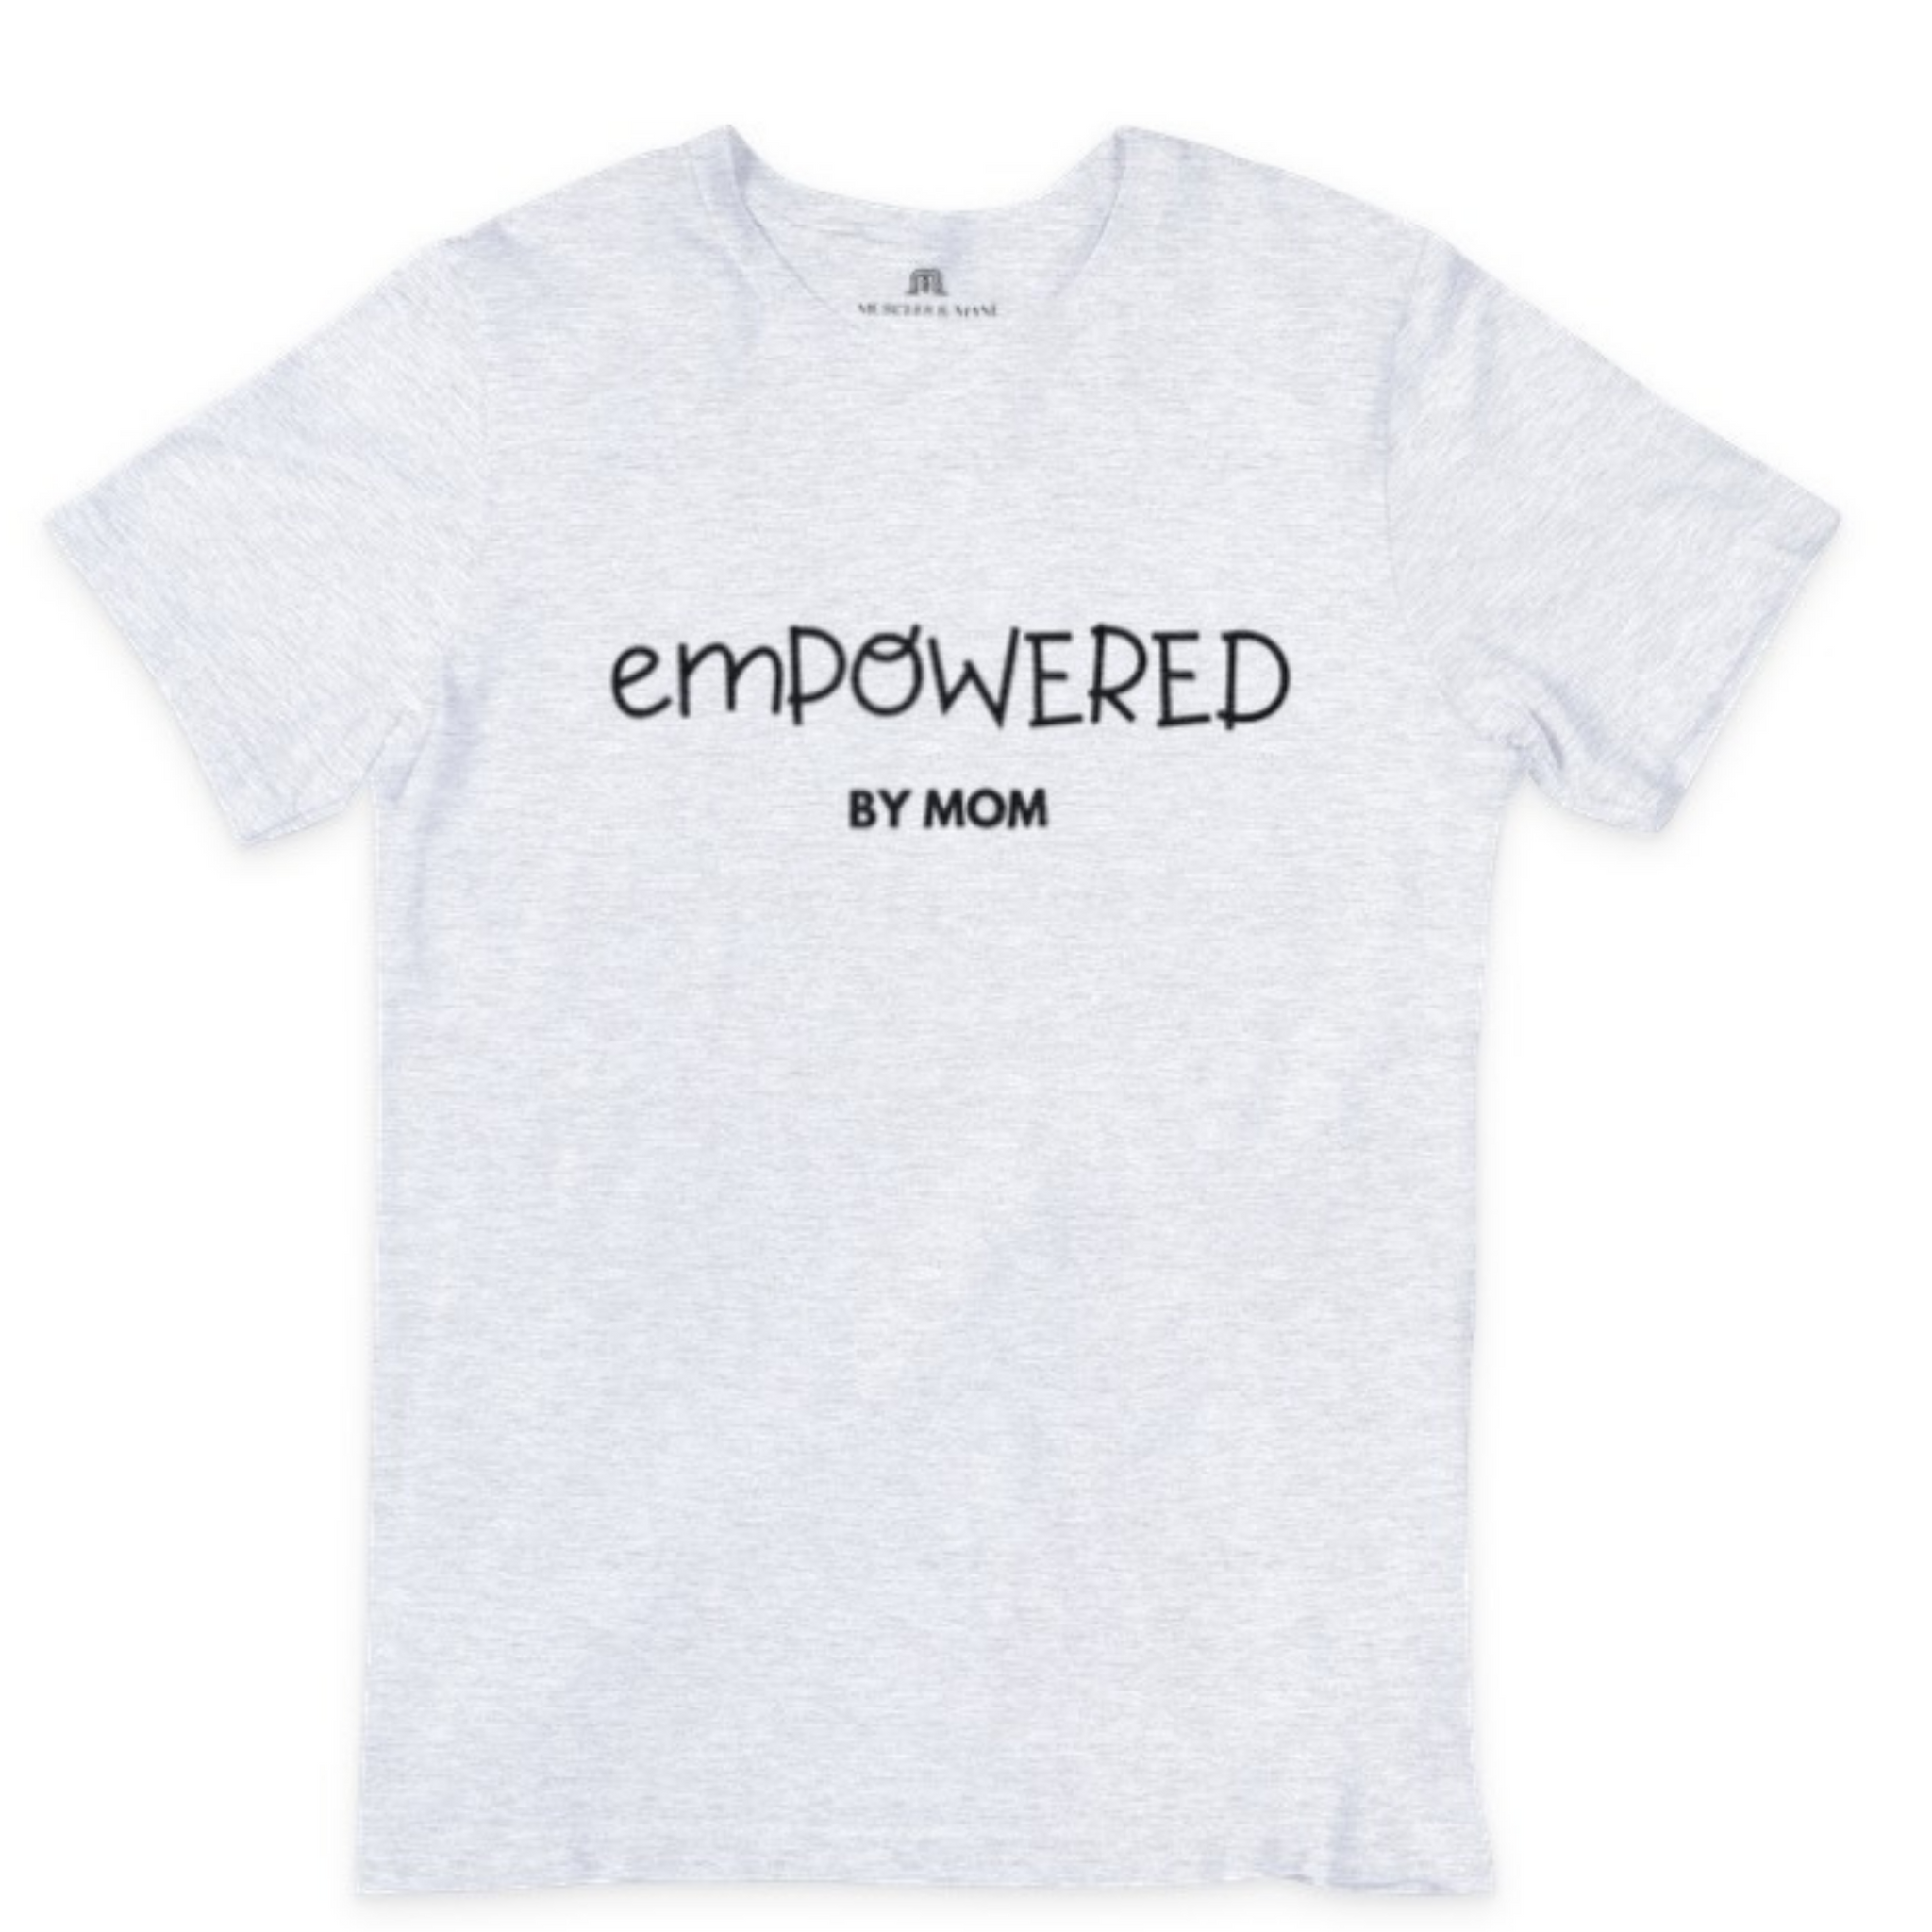 emPOWERED BY MOM